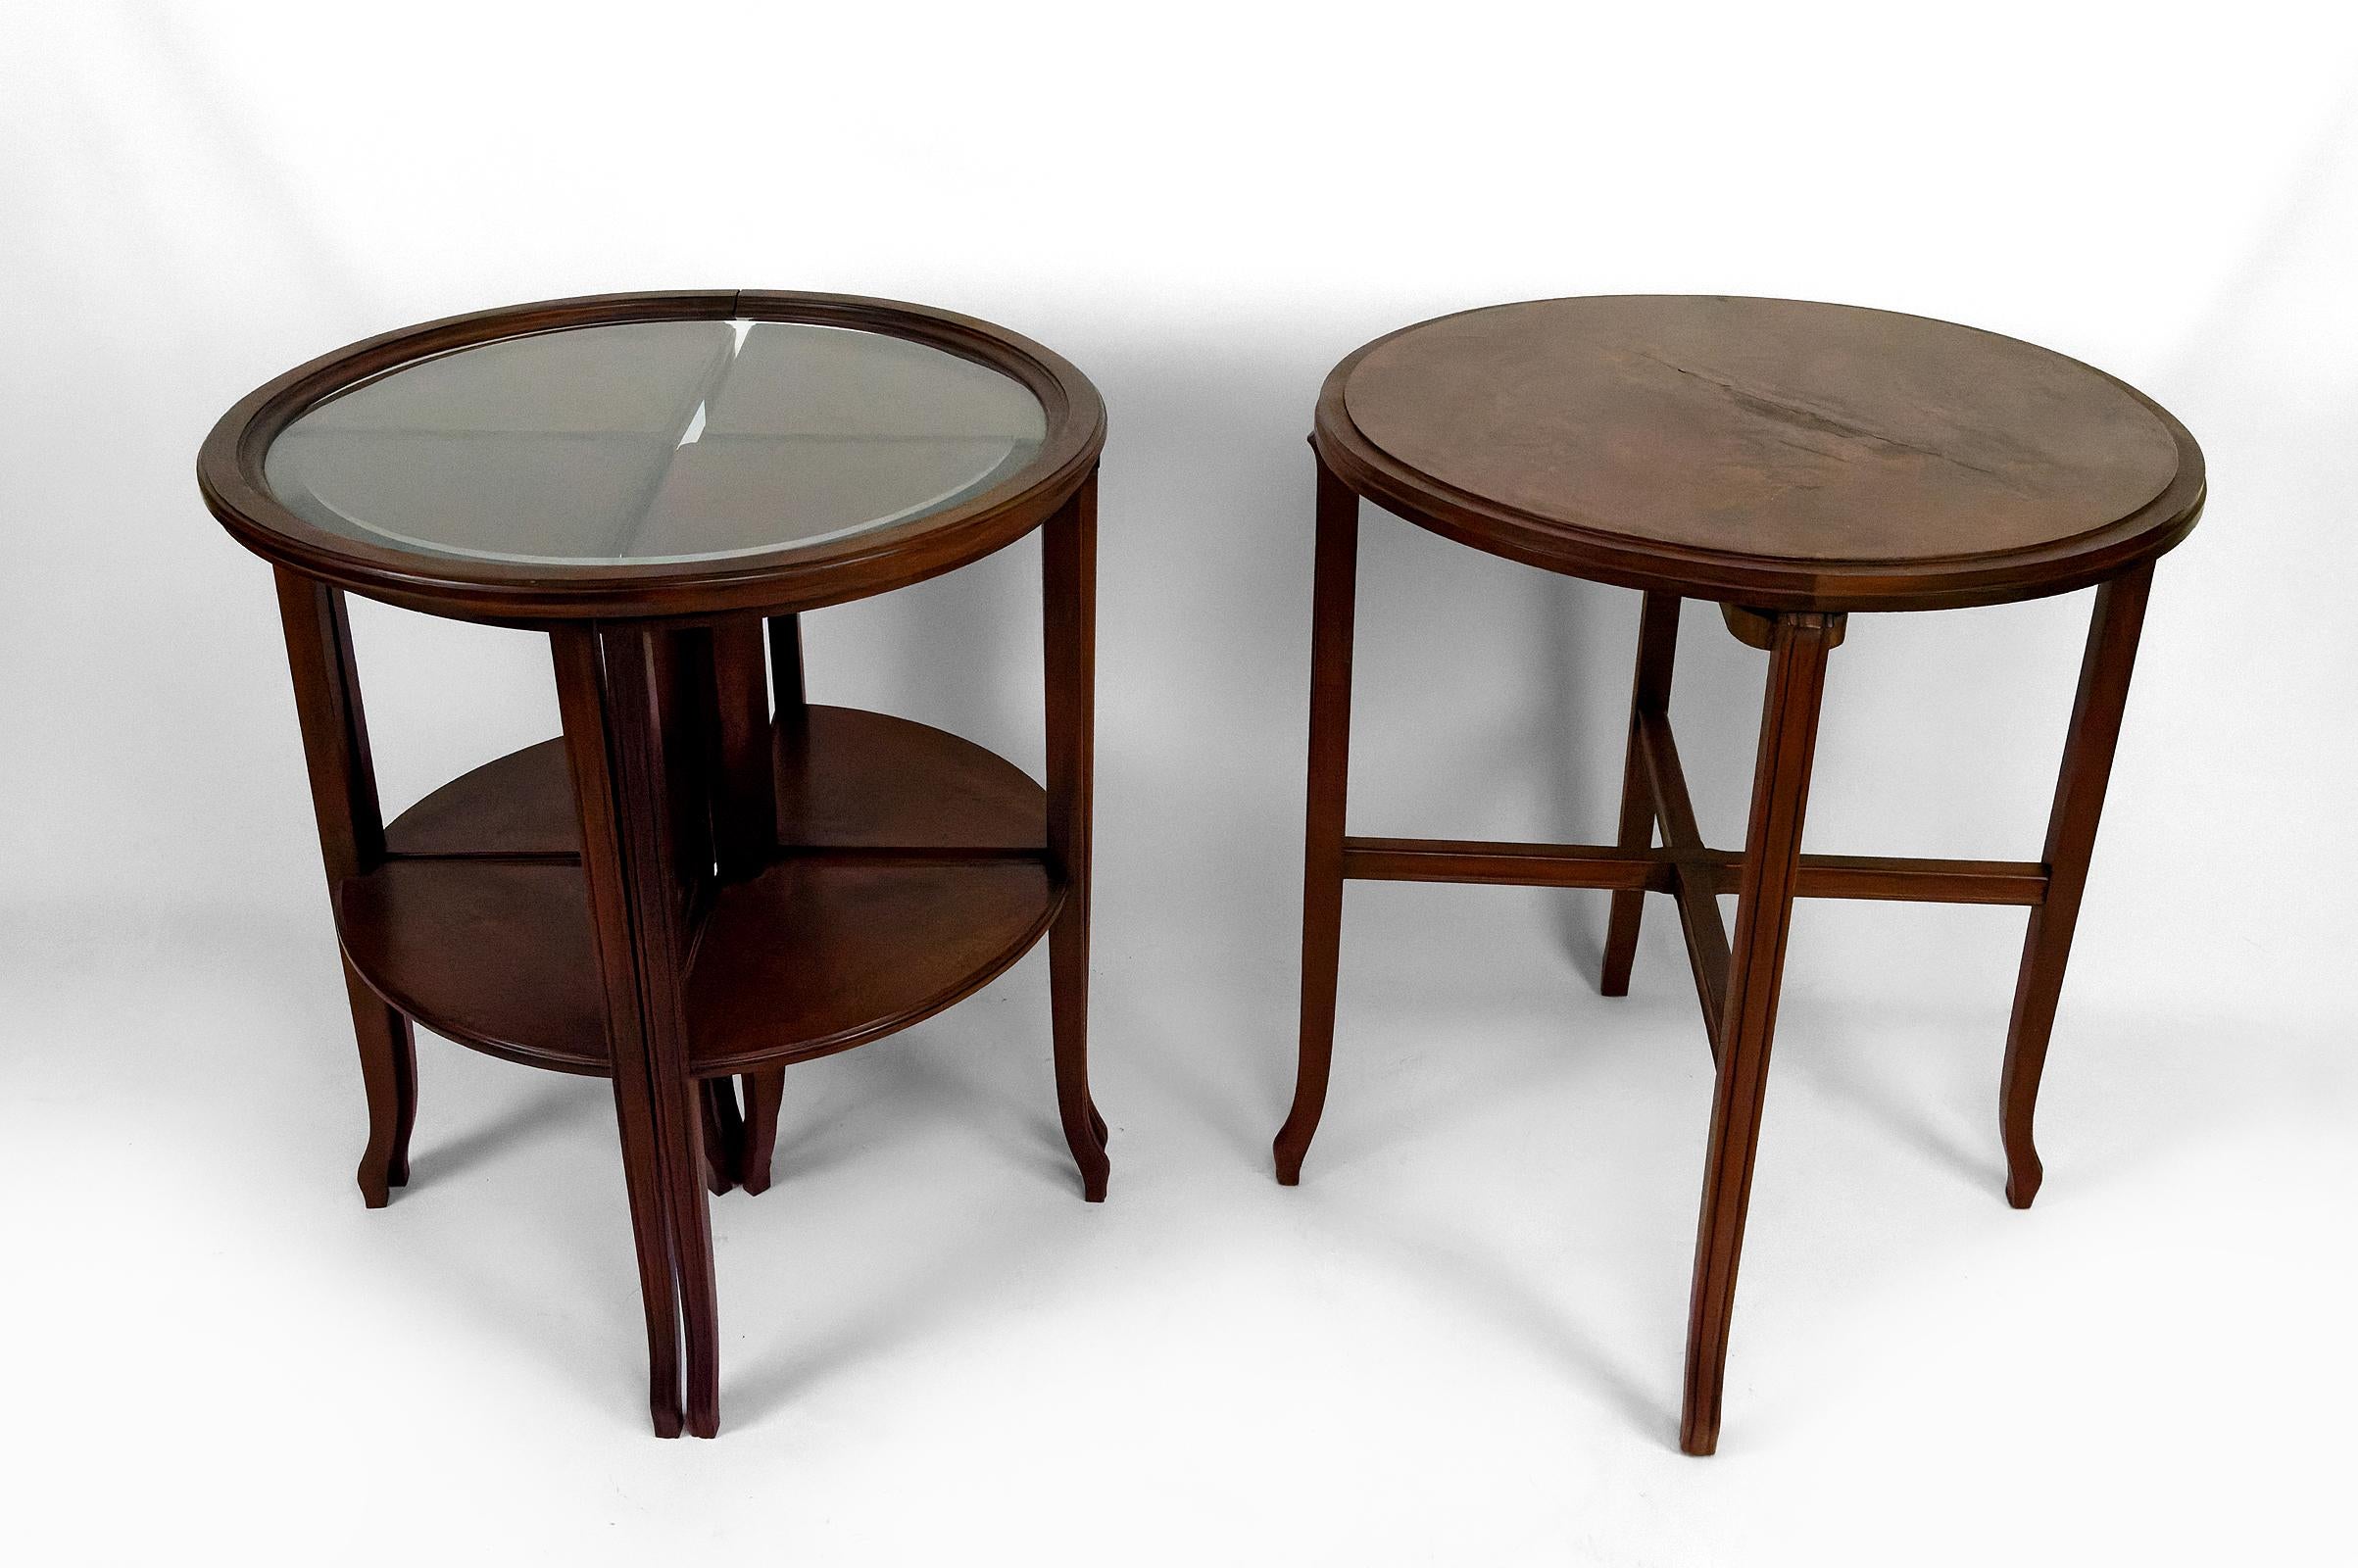 Serving table / nesting tables convertible into 2 side tables, Art Nouveau, 1910 For Sale 3